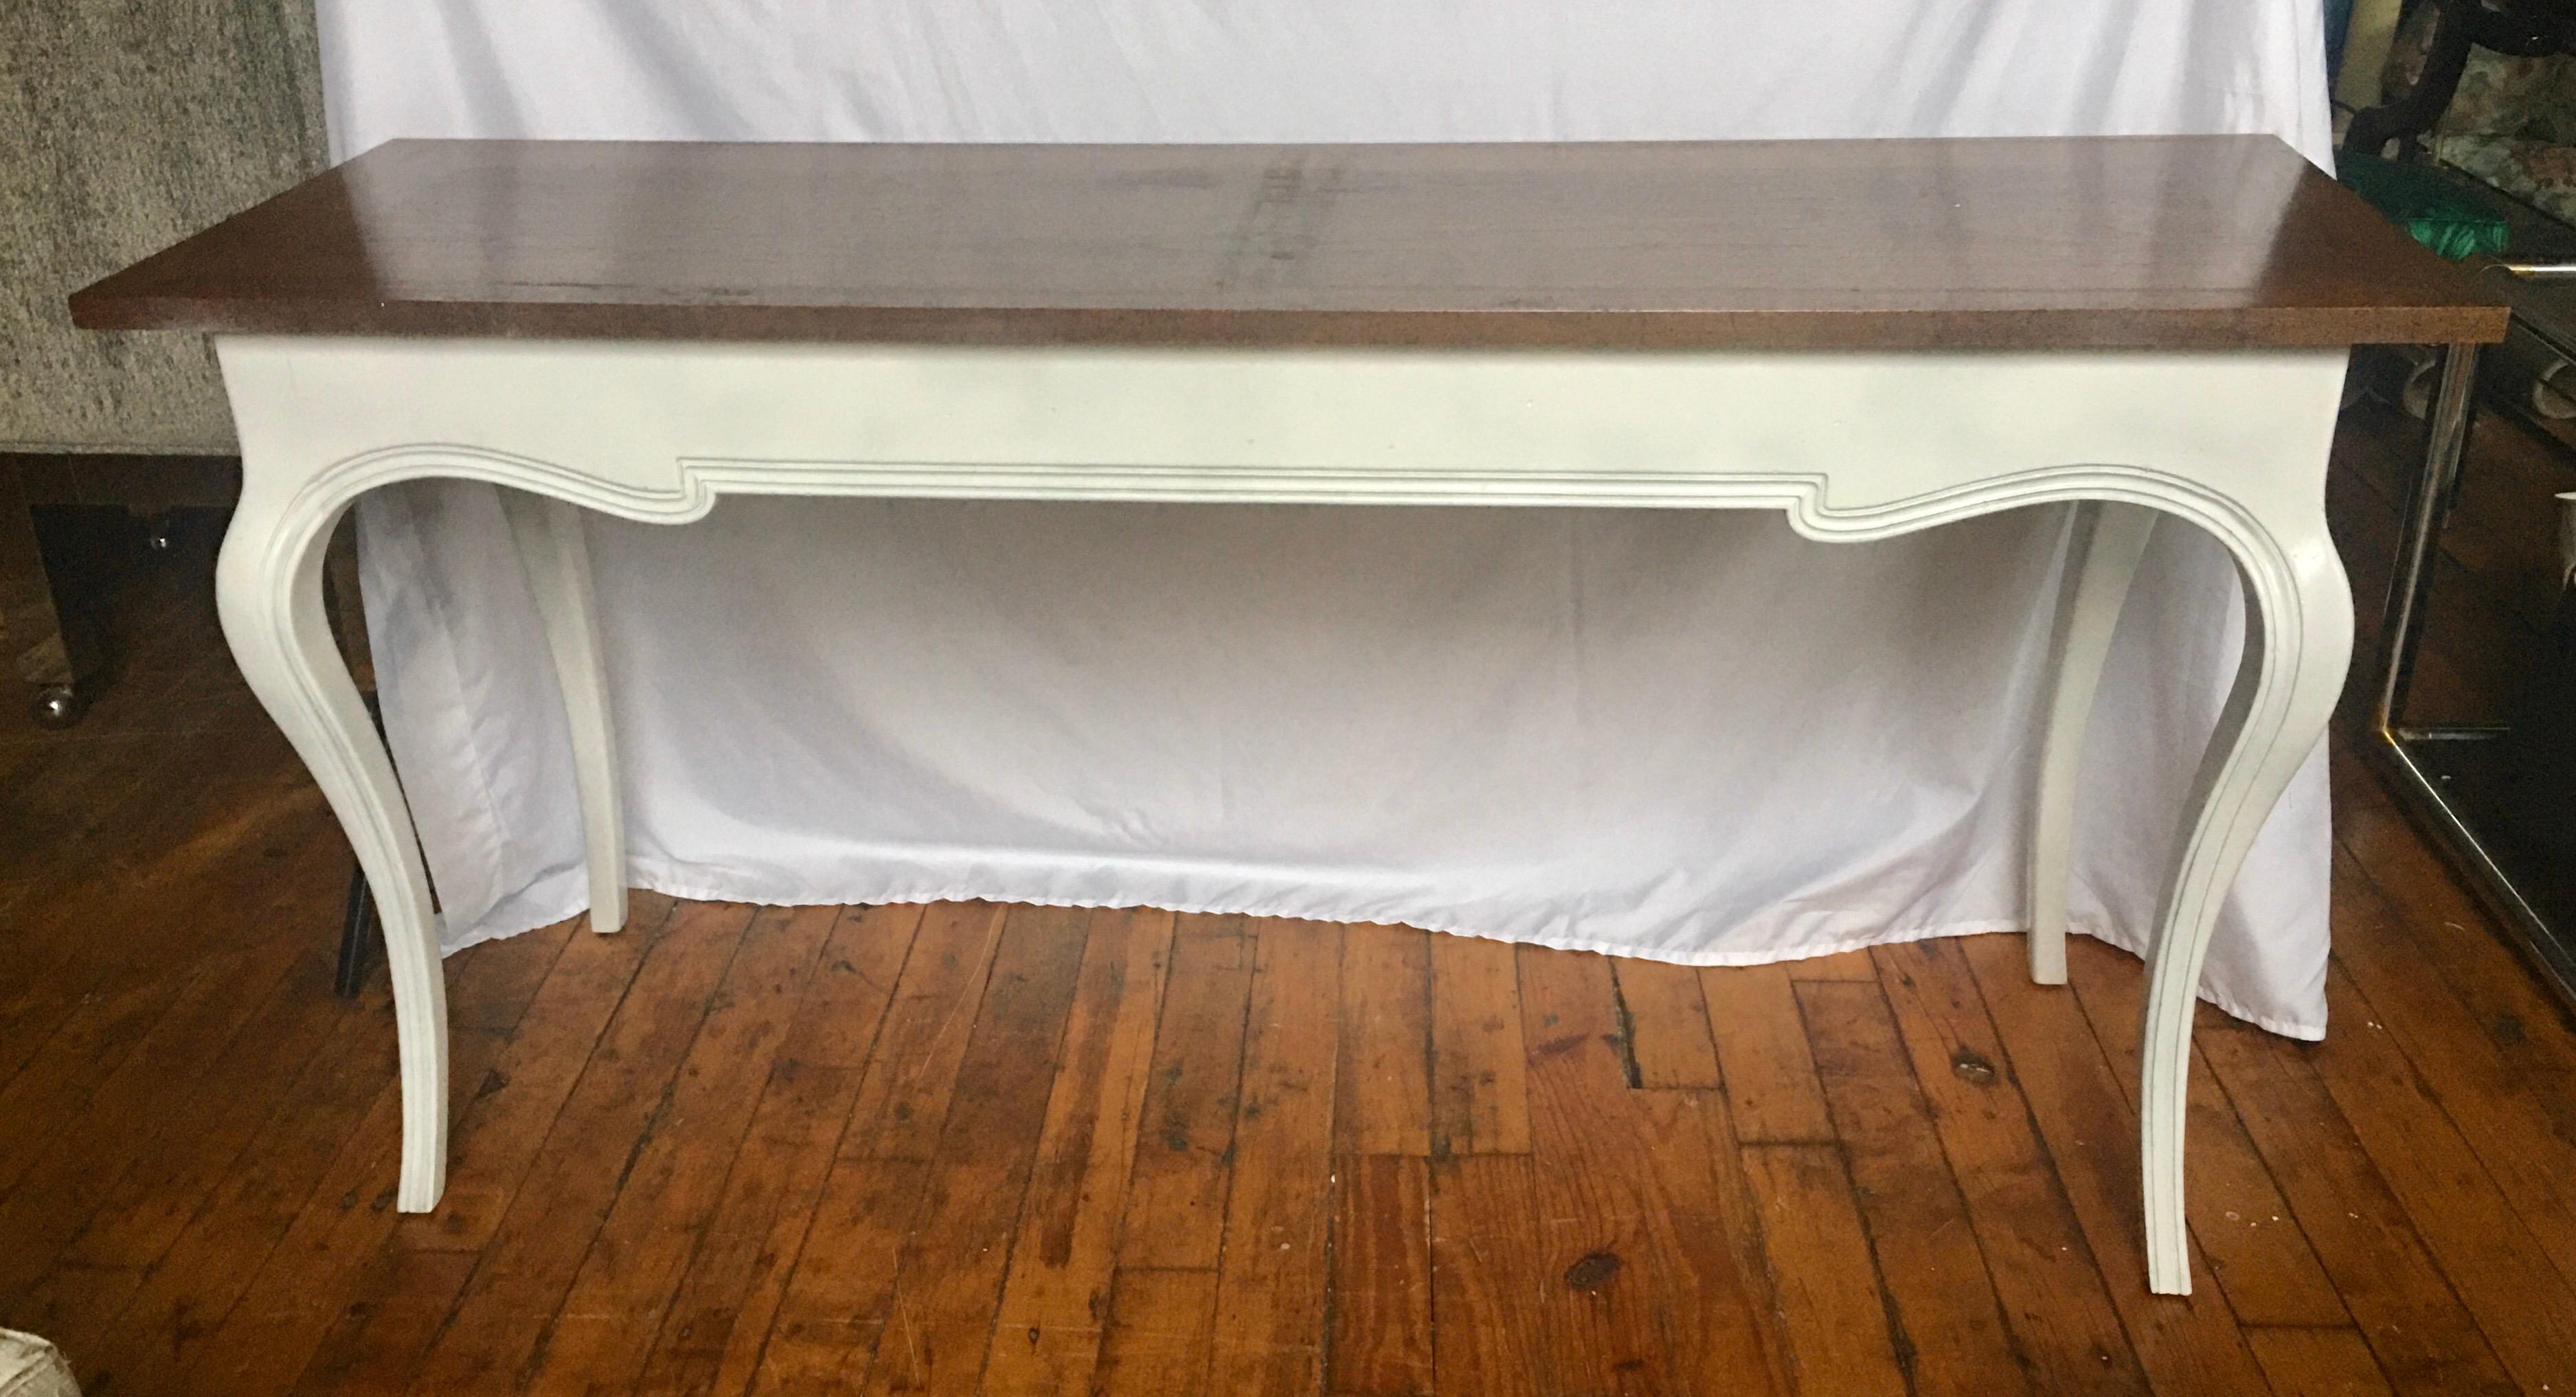 Midcentury French Provincial style console sofa table by John Stuart. Base features a white painted finish with curved cabriole legs and one single drawer. Top is stained wood. Table could also be used as a long desk.